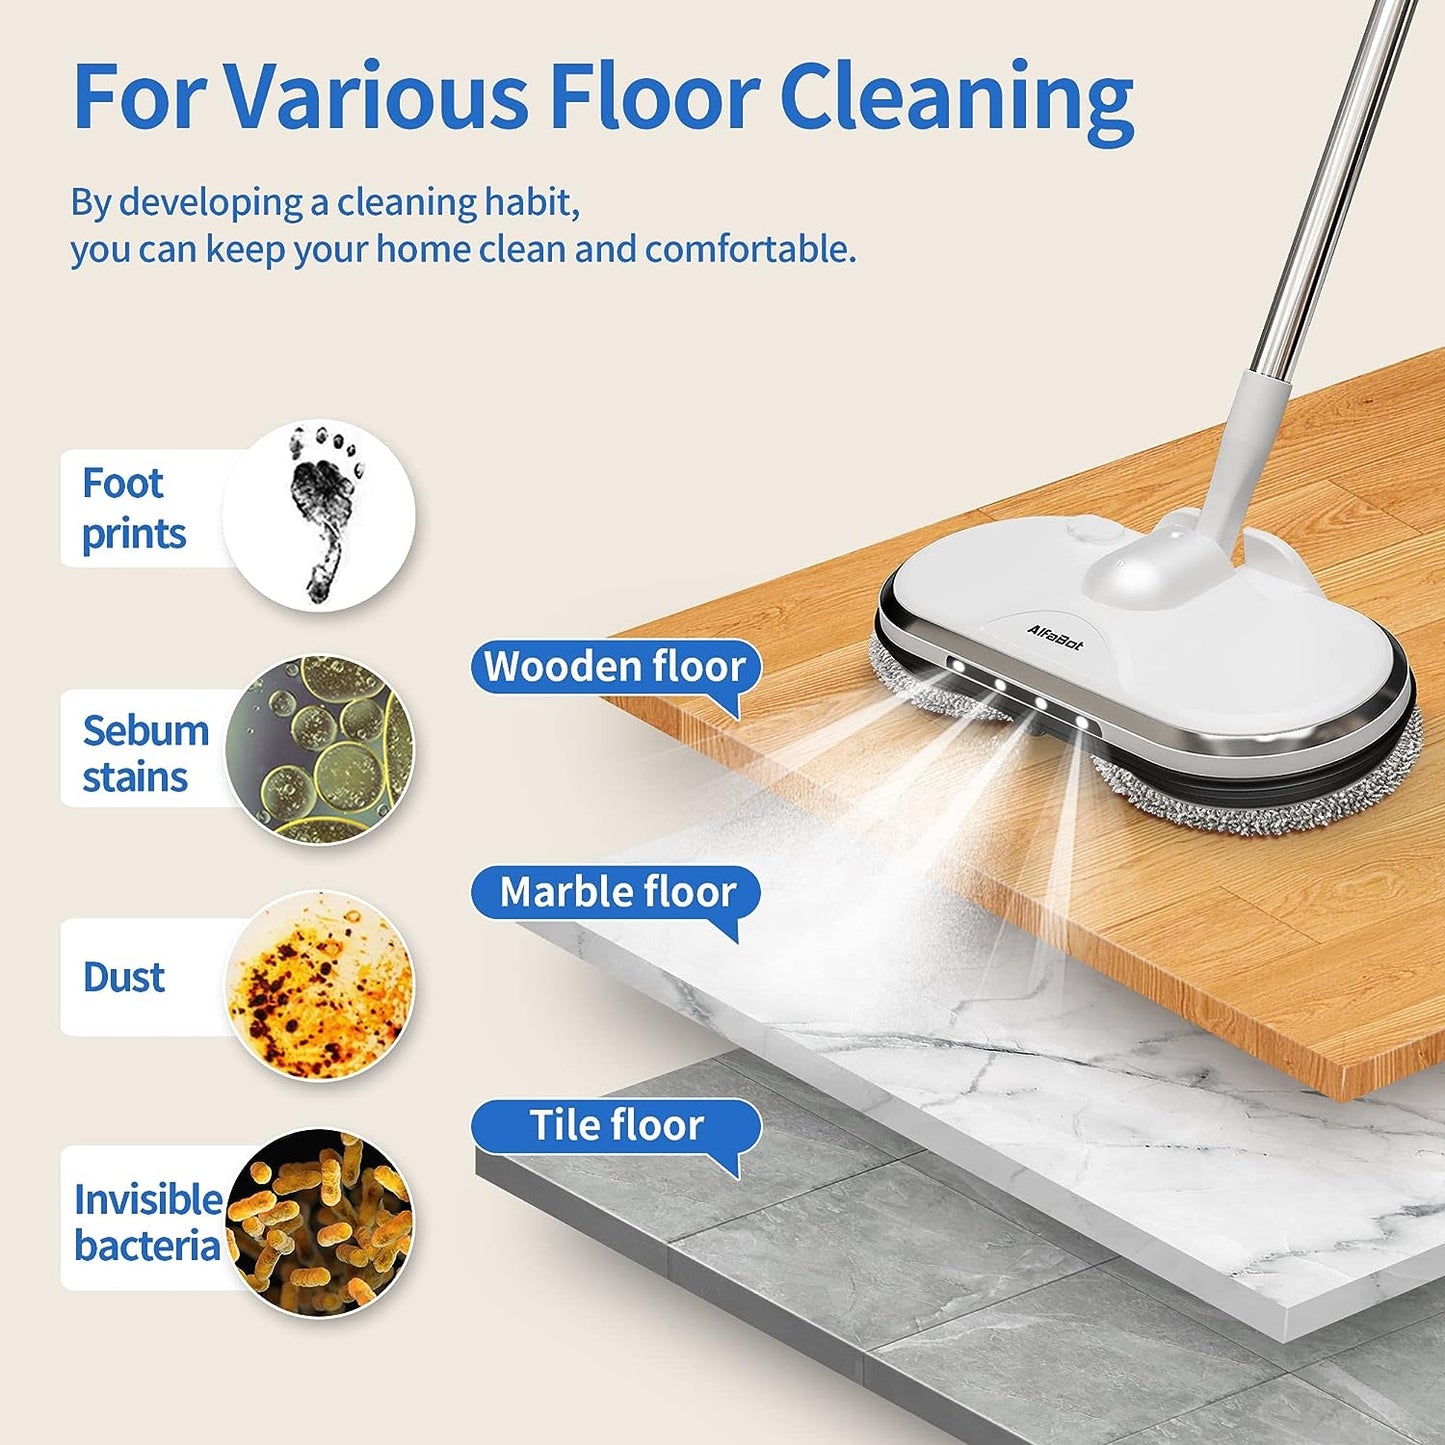 POWERFULL Cordless Electric Mop for Floor Cleaning, AlfaBot WS-24 Electric Spin Mop, Electric Mop with Water Sprayer and LED Headlight, Lightweight & Rechargeable Floor Scrubber for Hardwood Tile & Laminate Floors